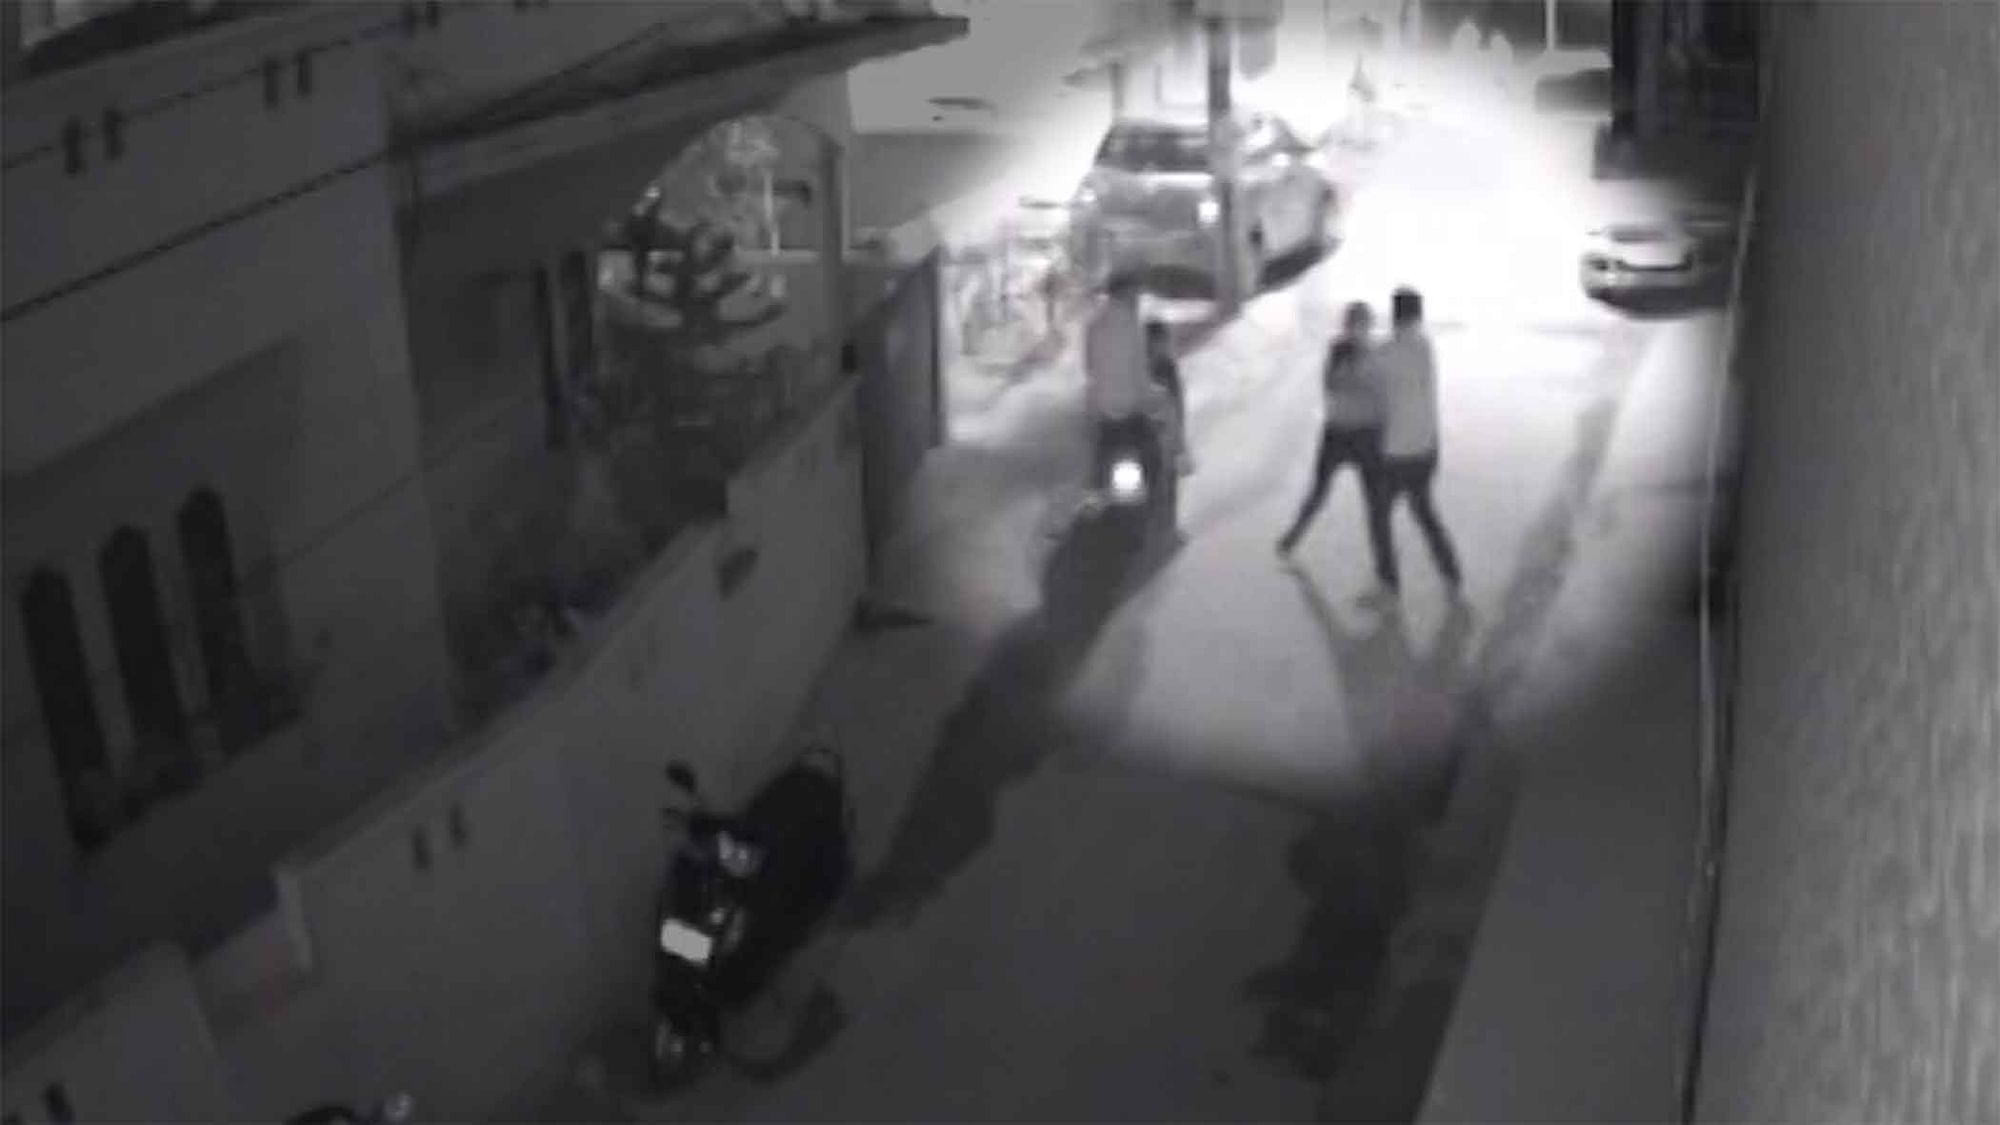 A still from the alleged CCTV footage that shows two boys molesting a girl on New Year’s eve in Bengaluru. (Photo Courtesy: ANI Screengrab)